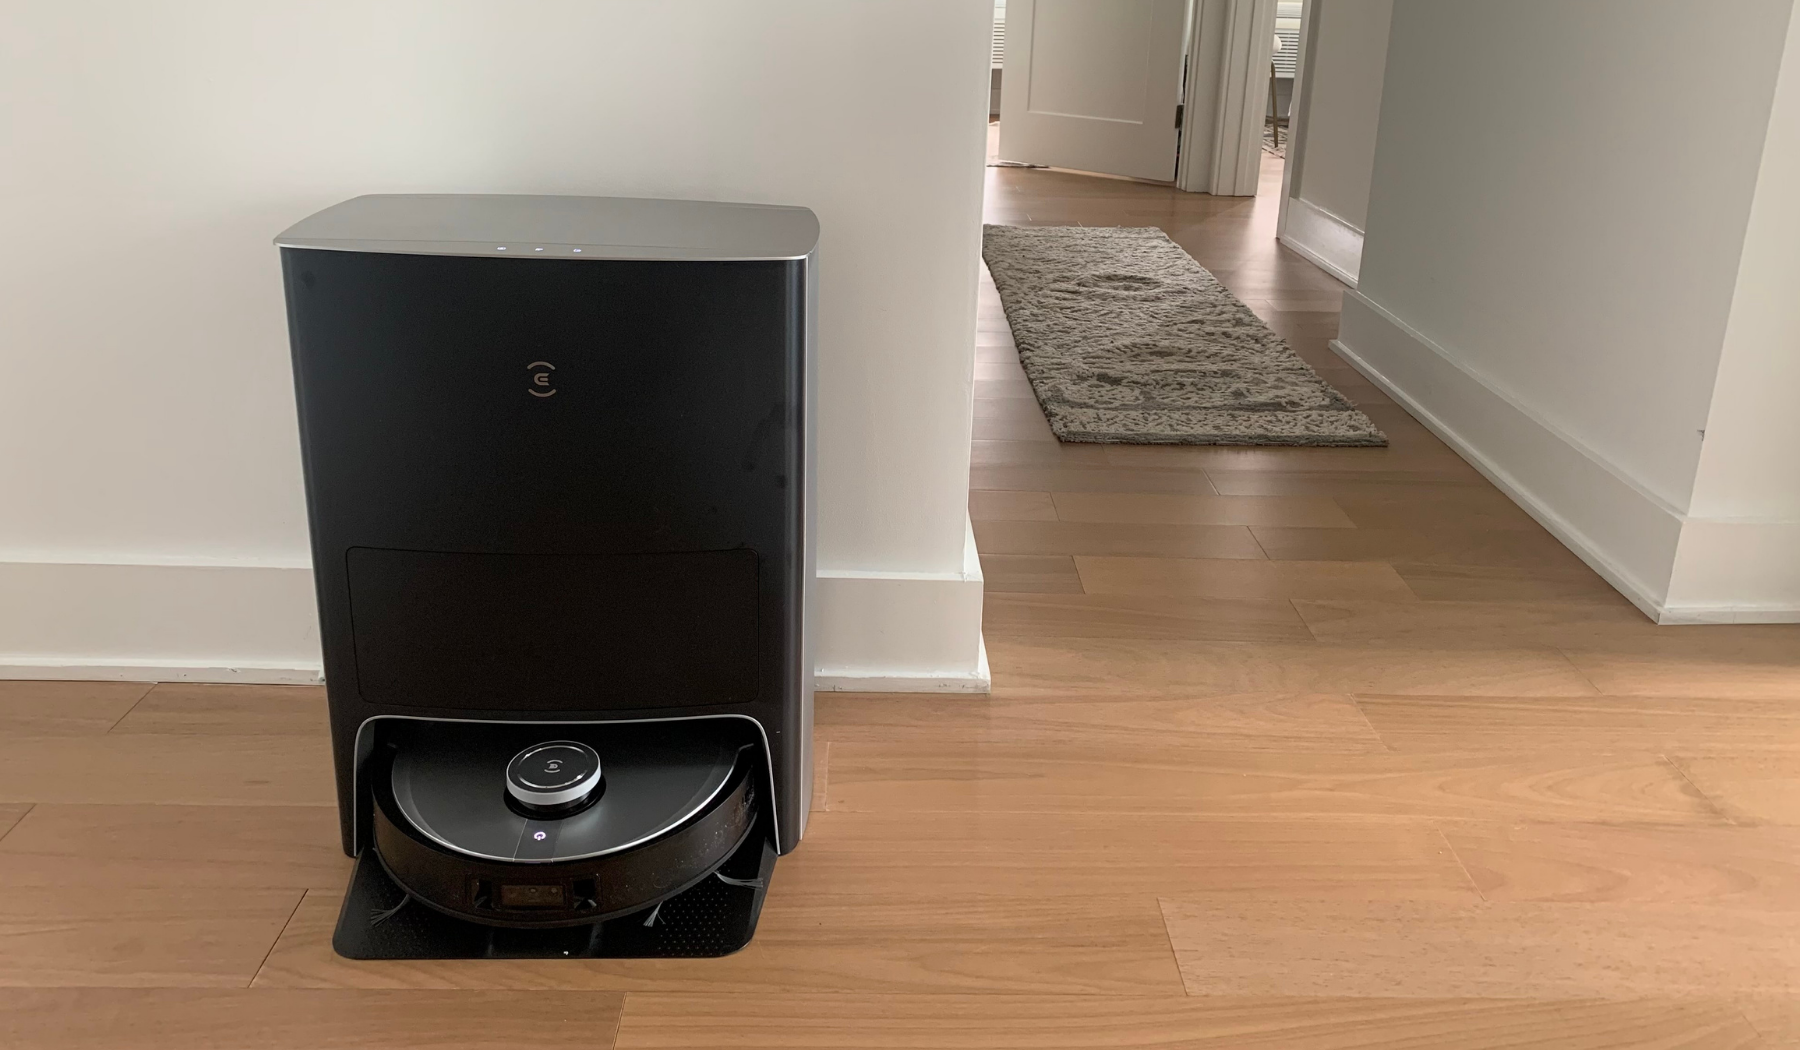 Ecovacs Deebot X1 Omni and station on wooden floor with hallway and rug in background